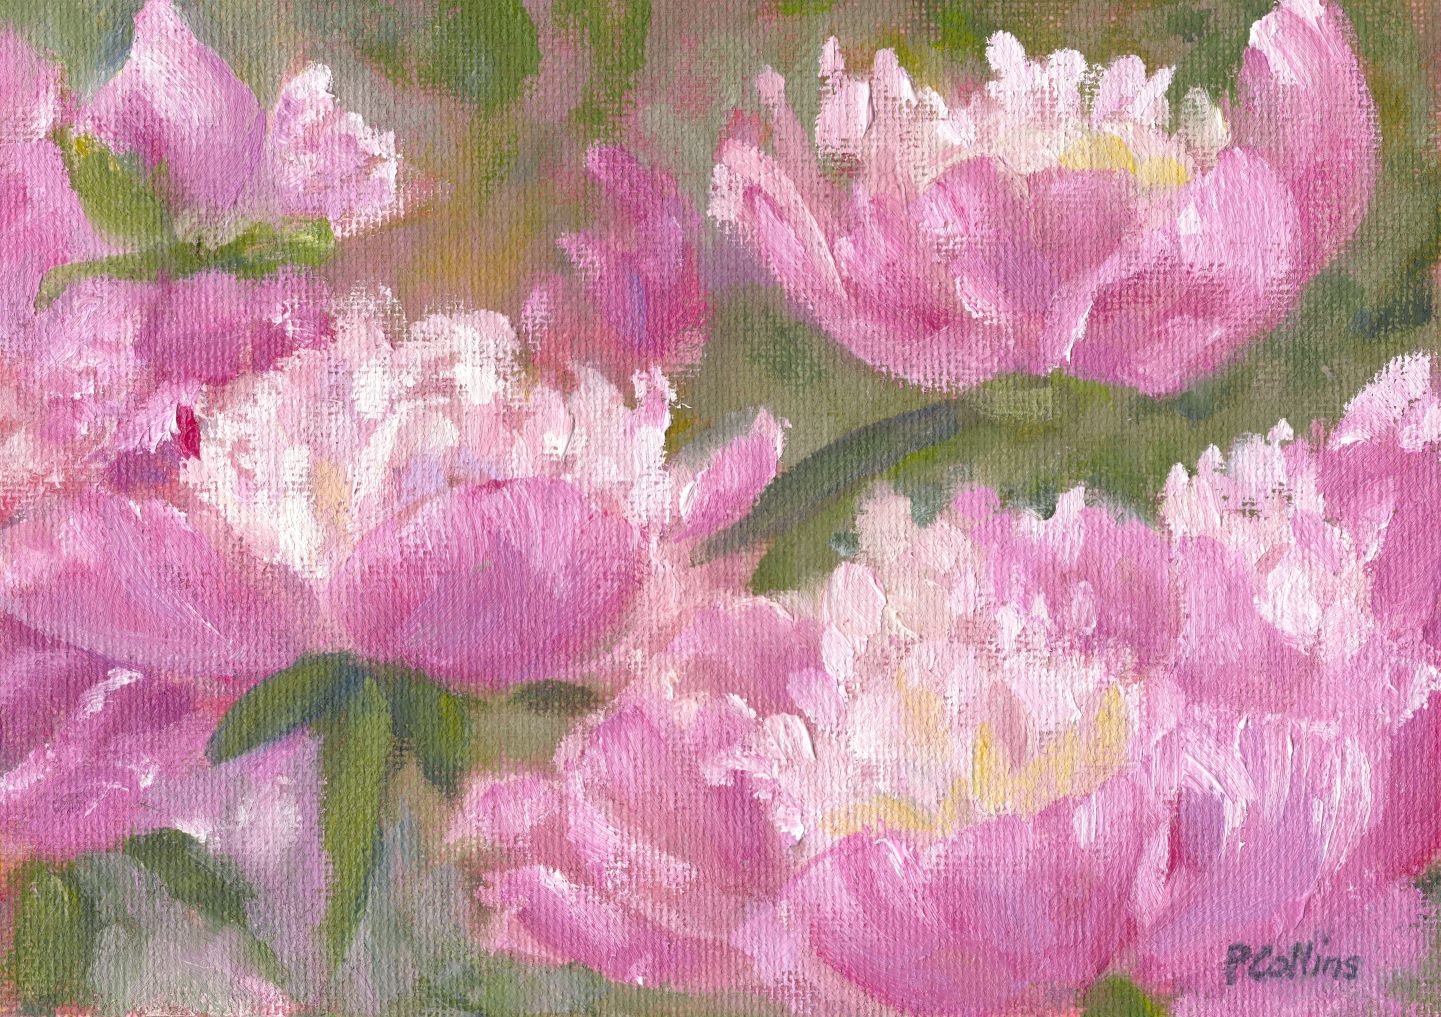 Quick Study - Peonies for mom